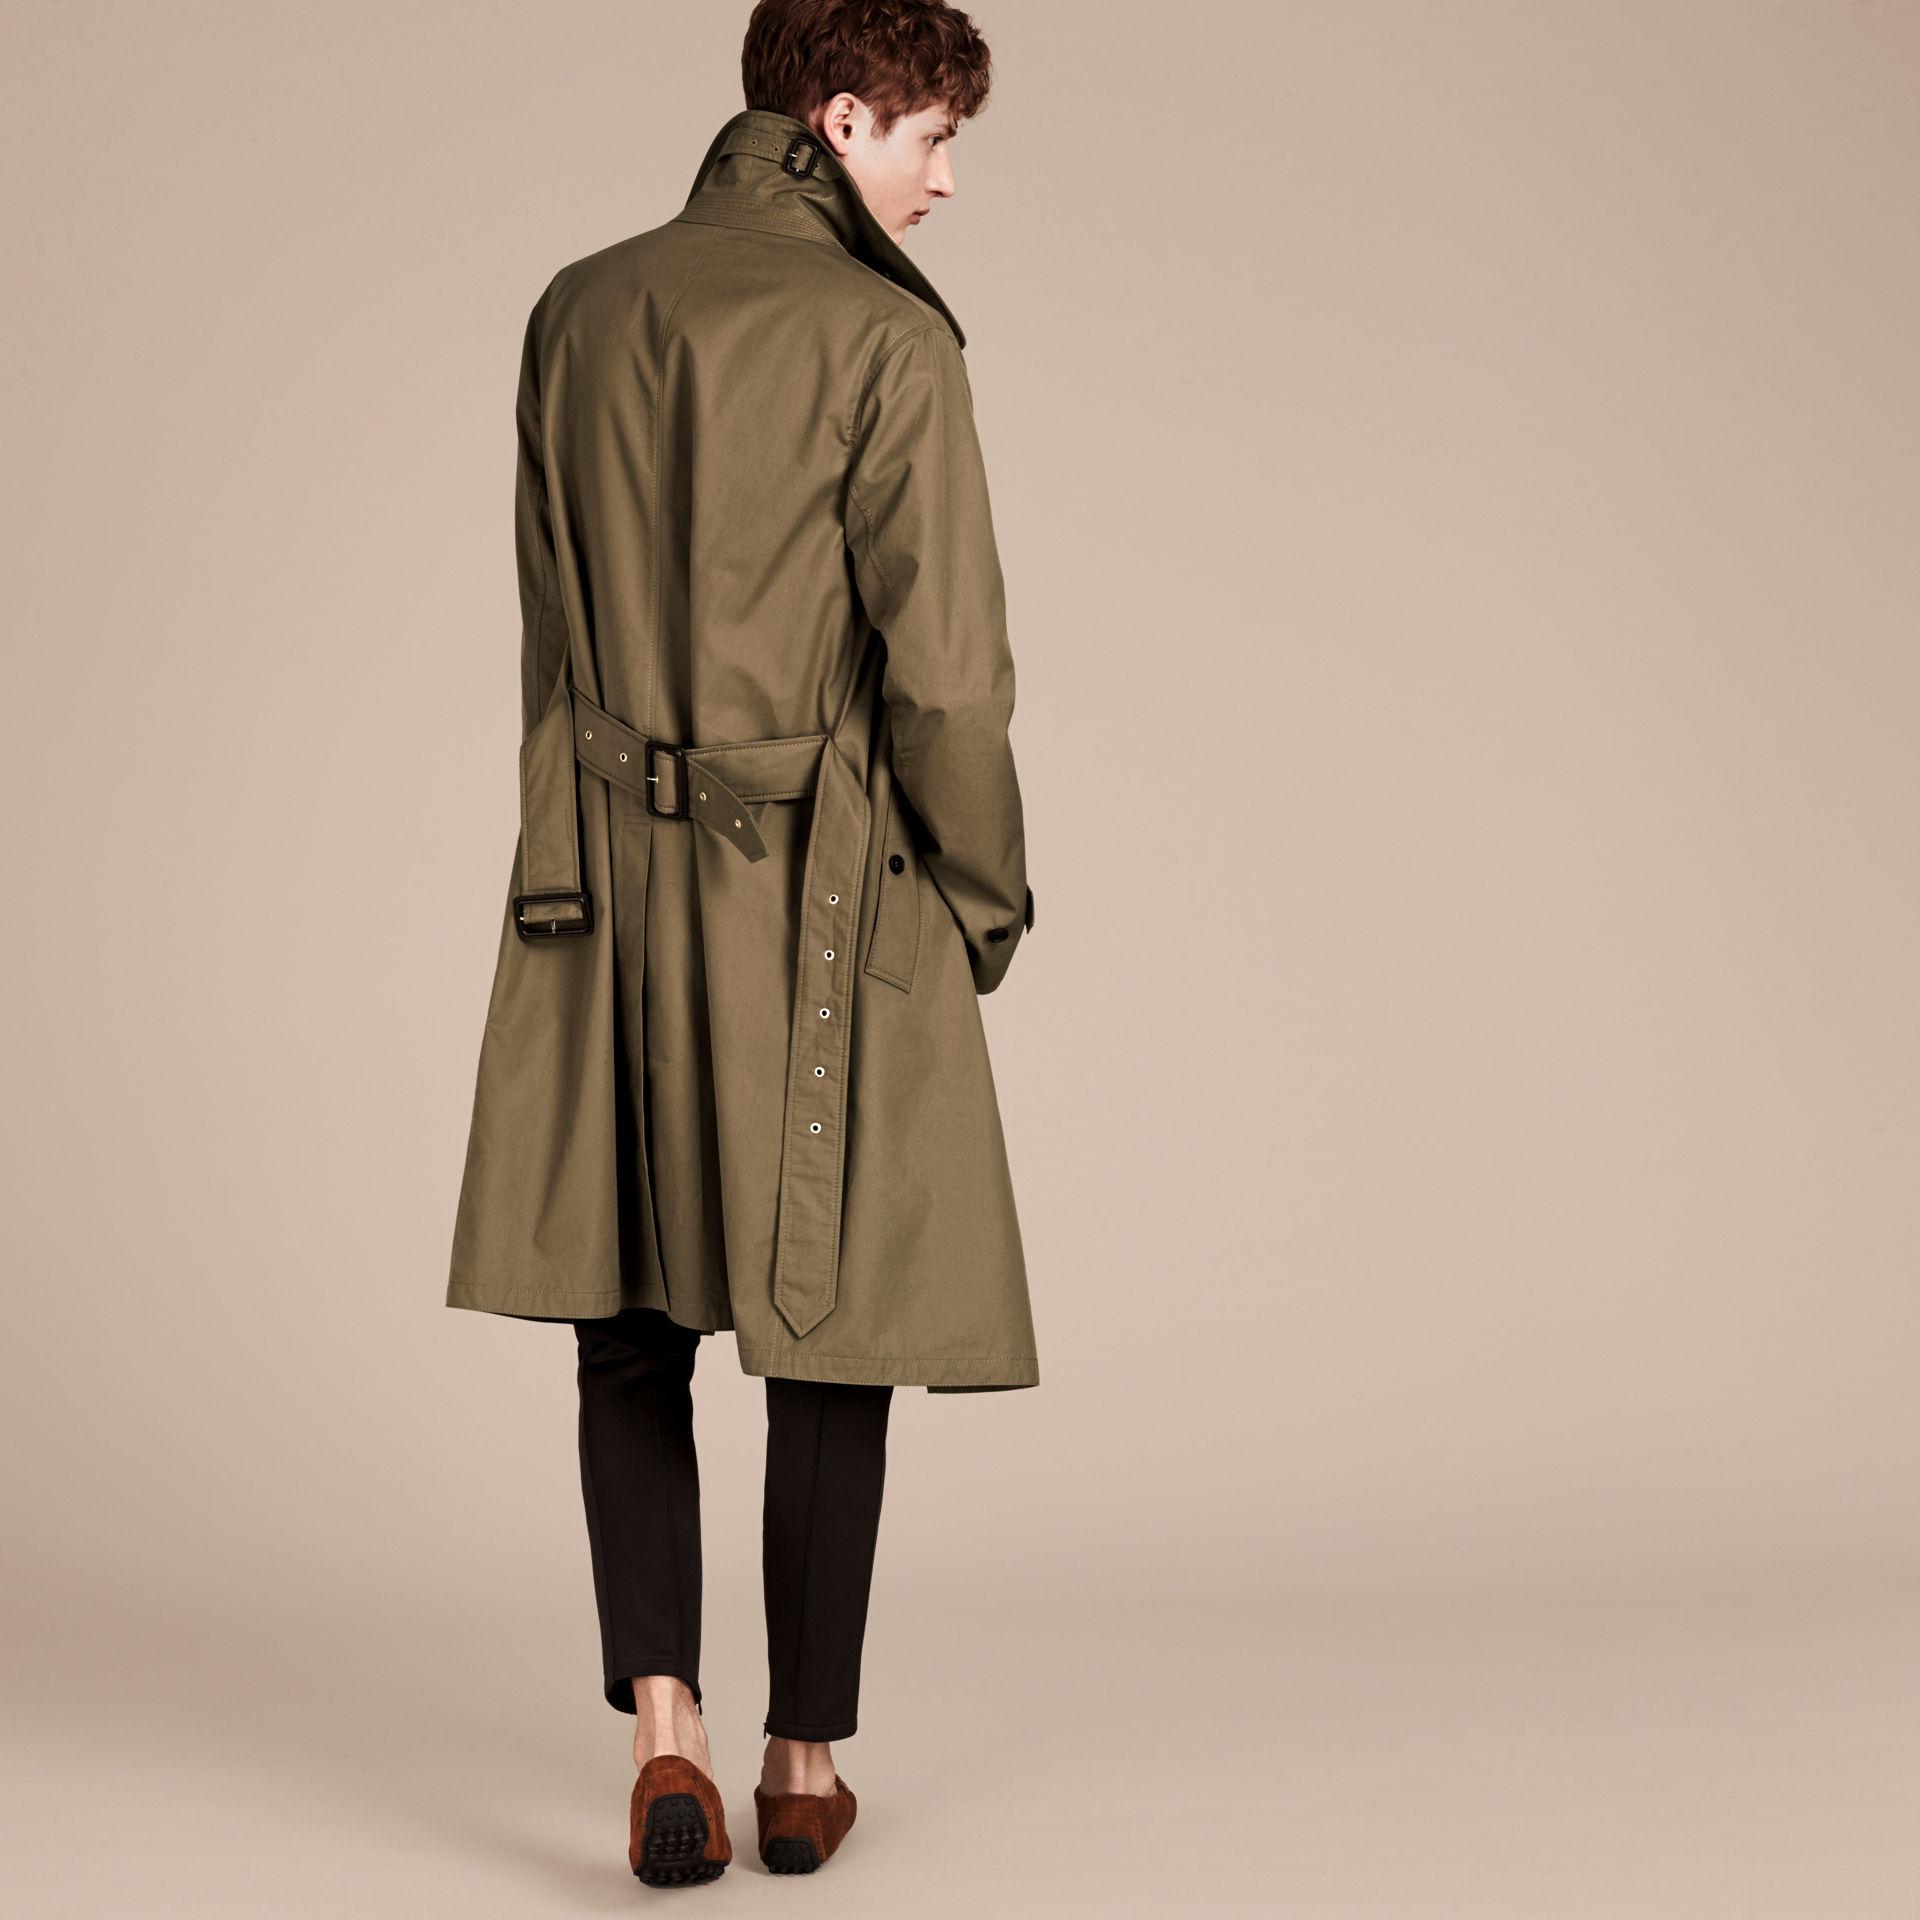 Burberry Cotton Gabardine Trench Coat in Military Olive (Gray) for Men -  Lyst